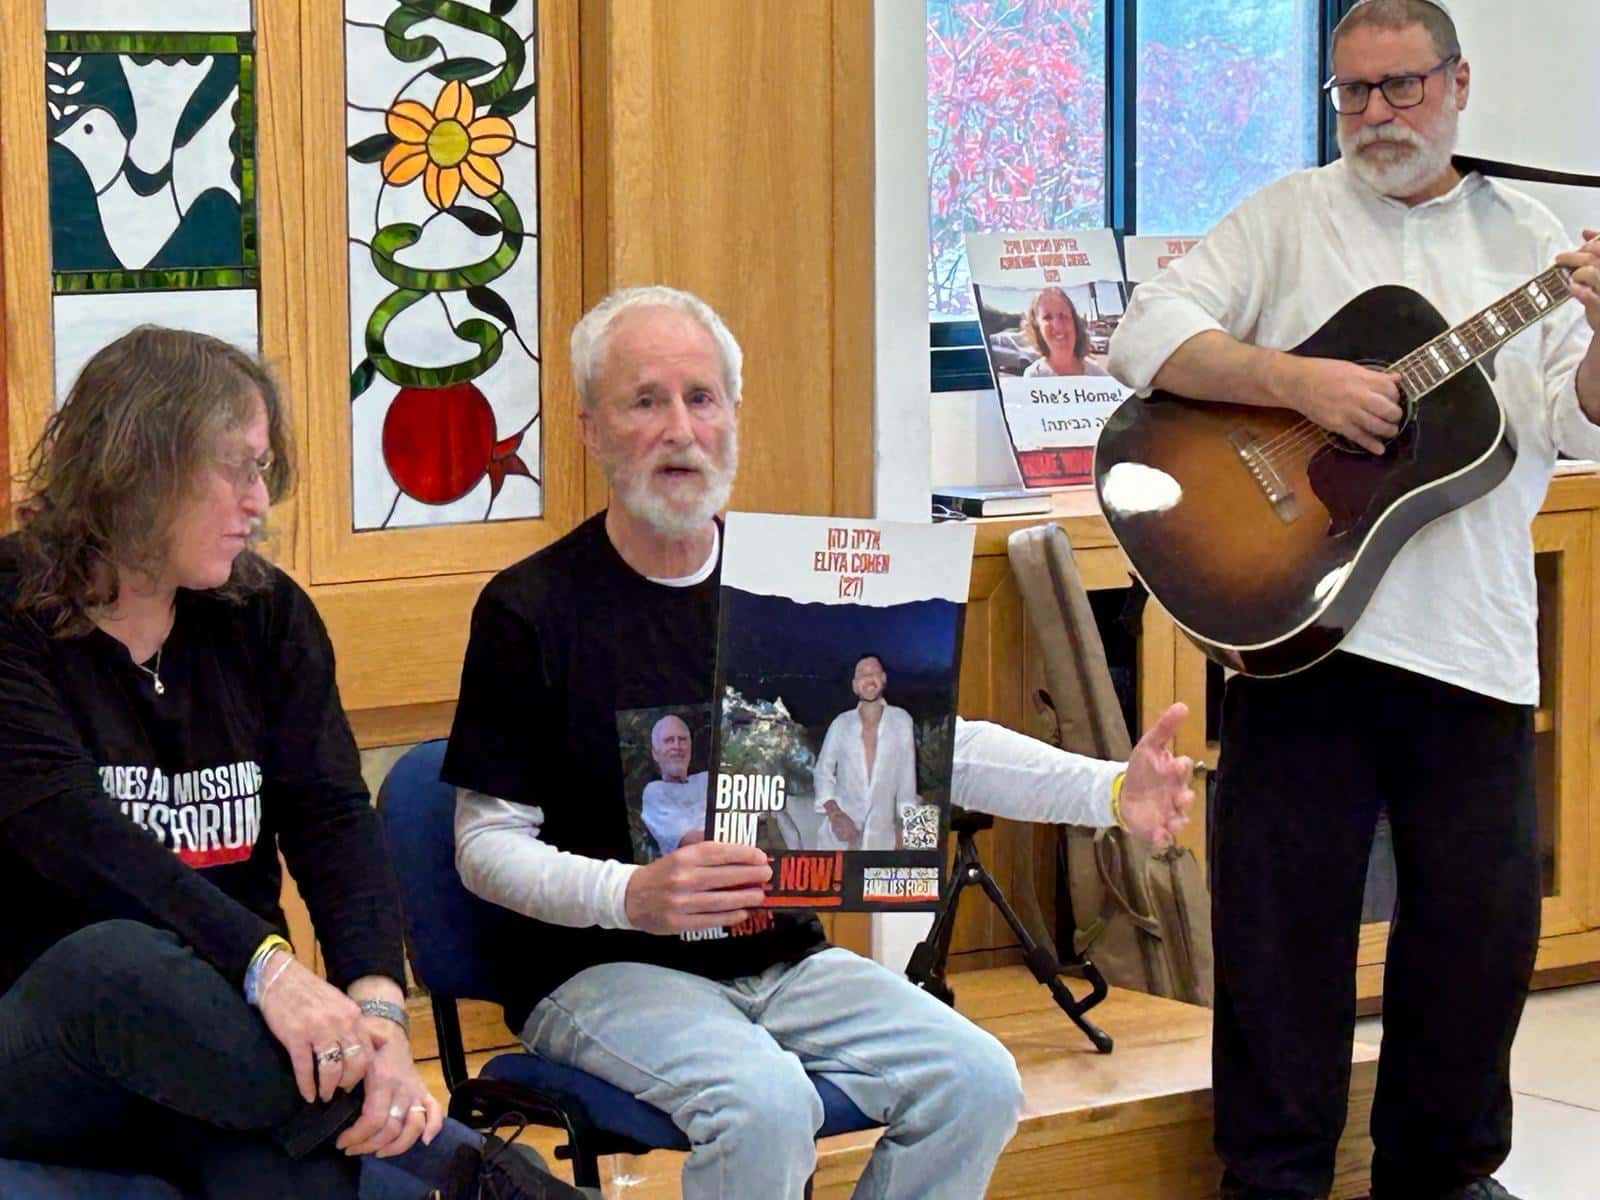 Two people sit in chairs holding a photo of an Israeli hostage while a man playing guitar stands next to them